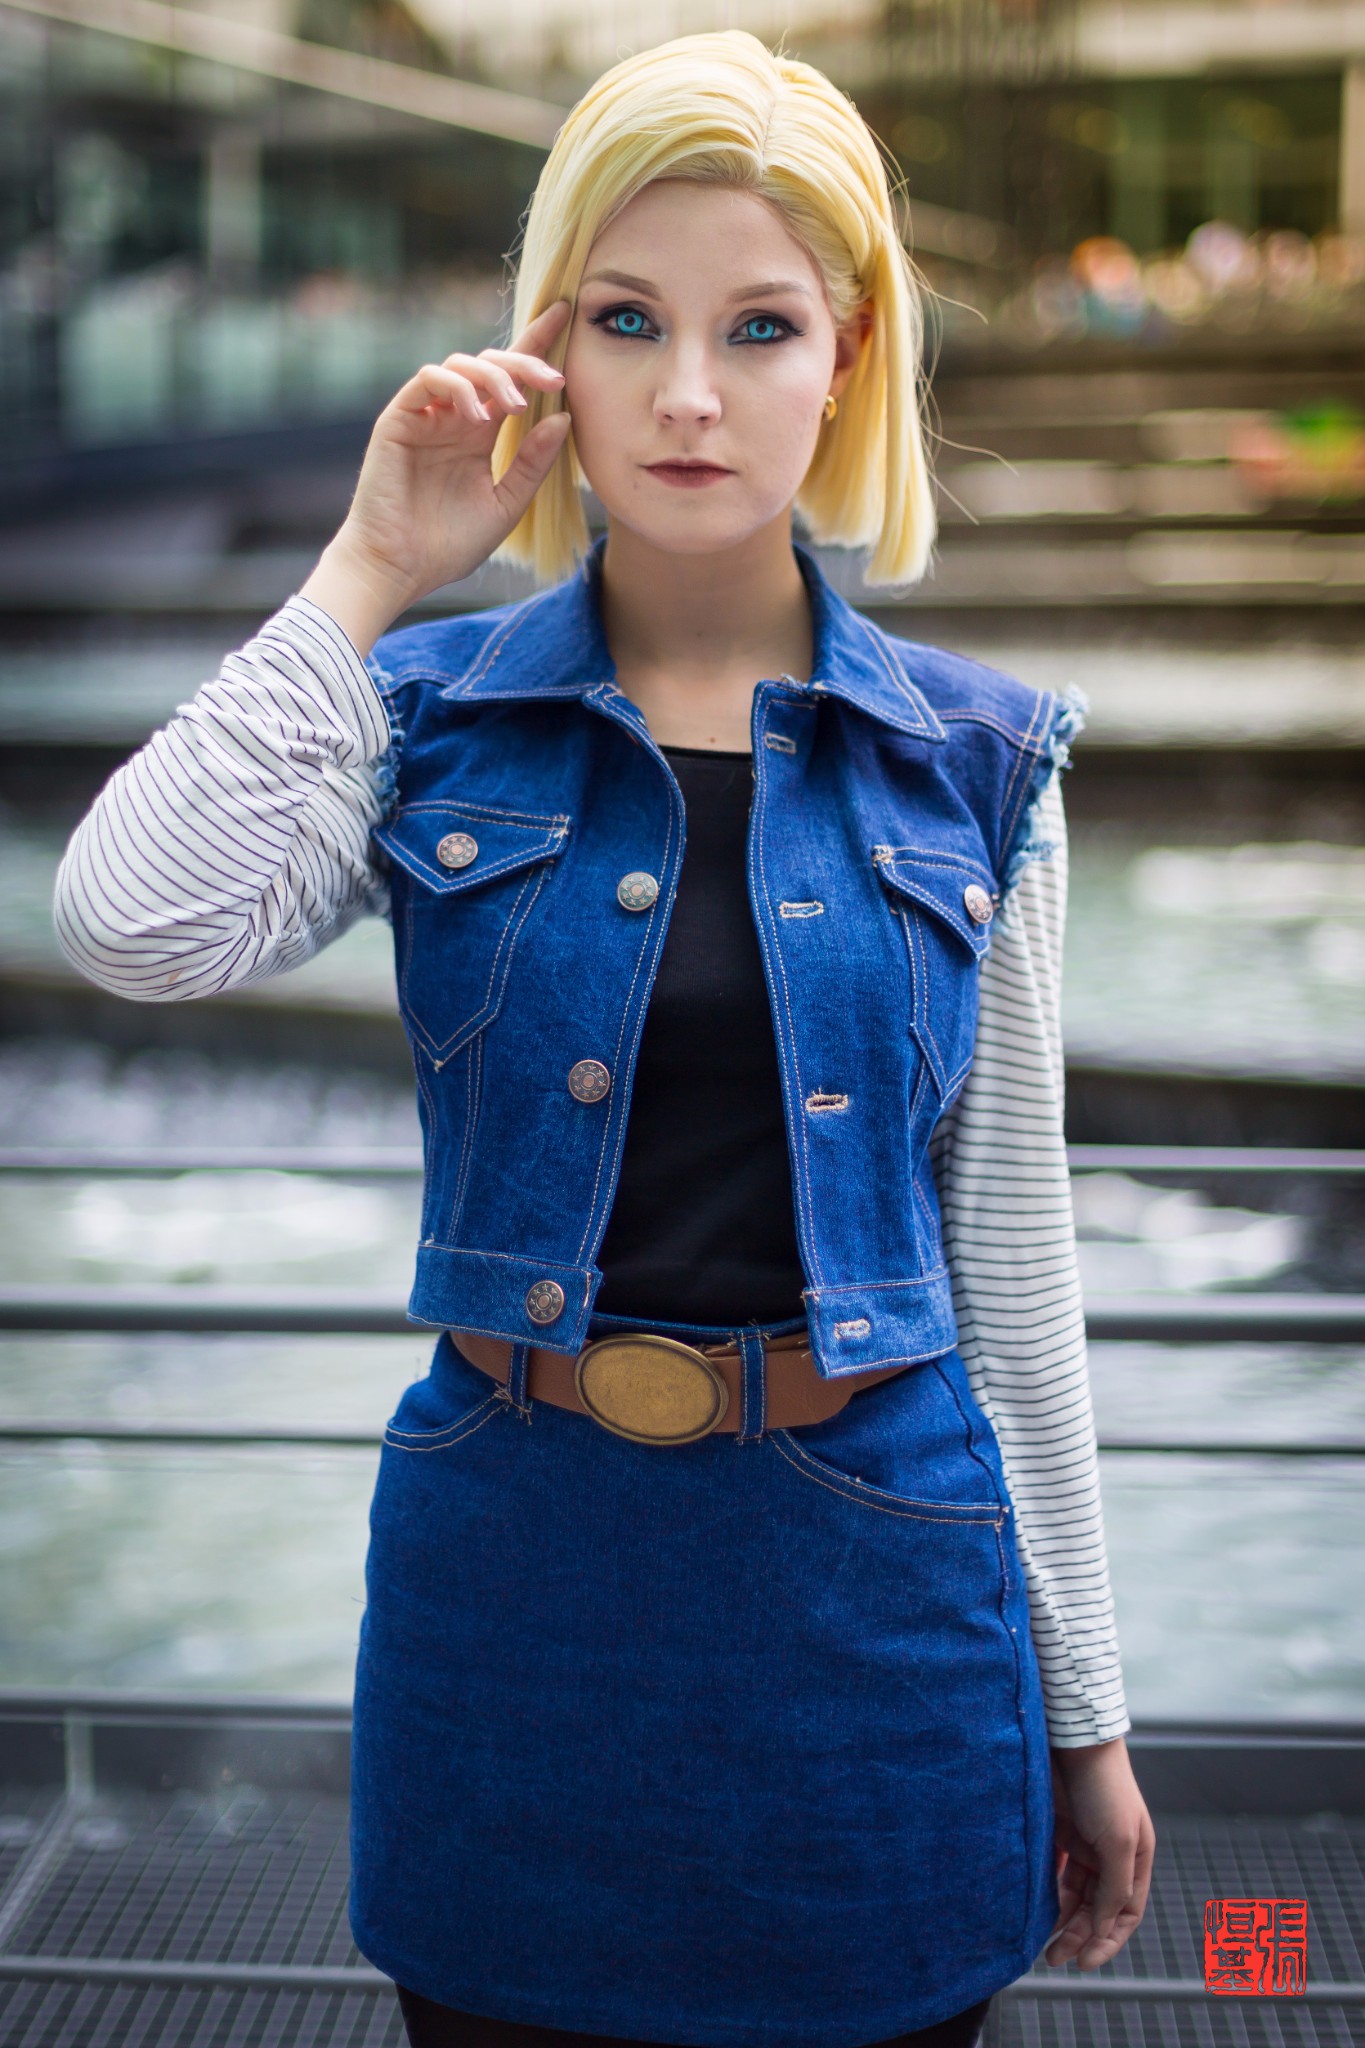 Android 18 painted on clothes cosplay